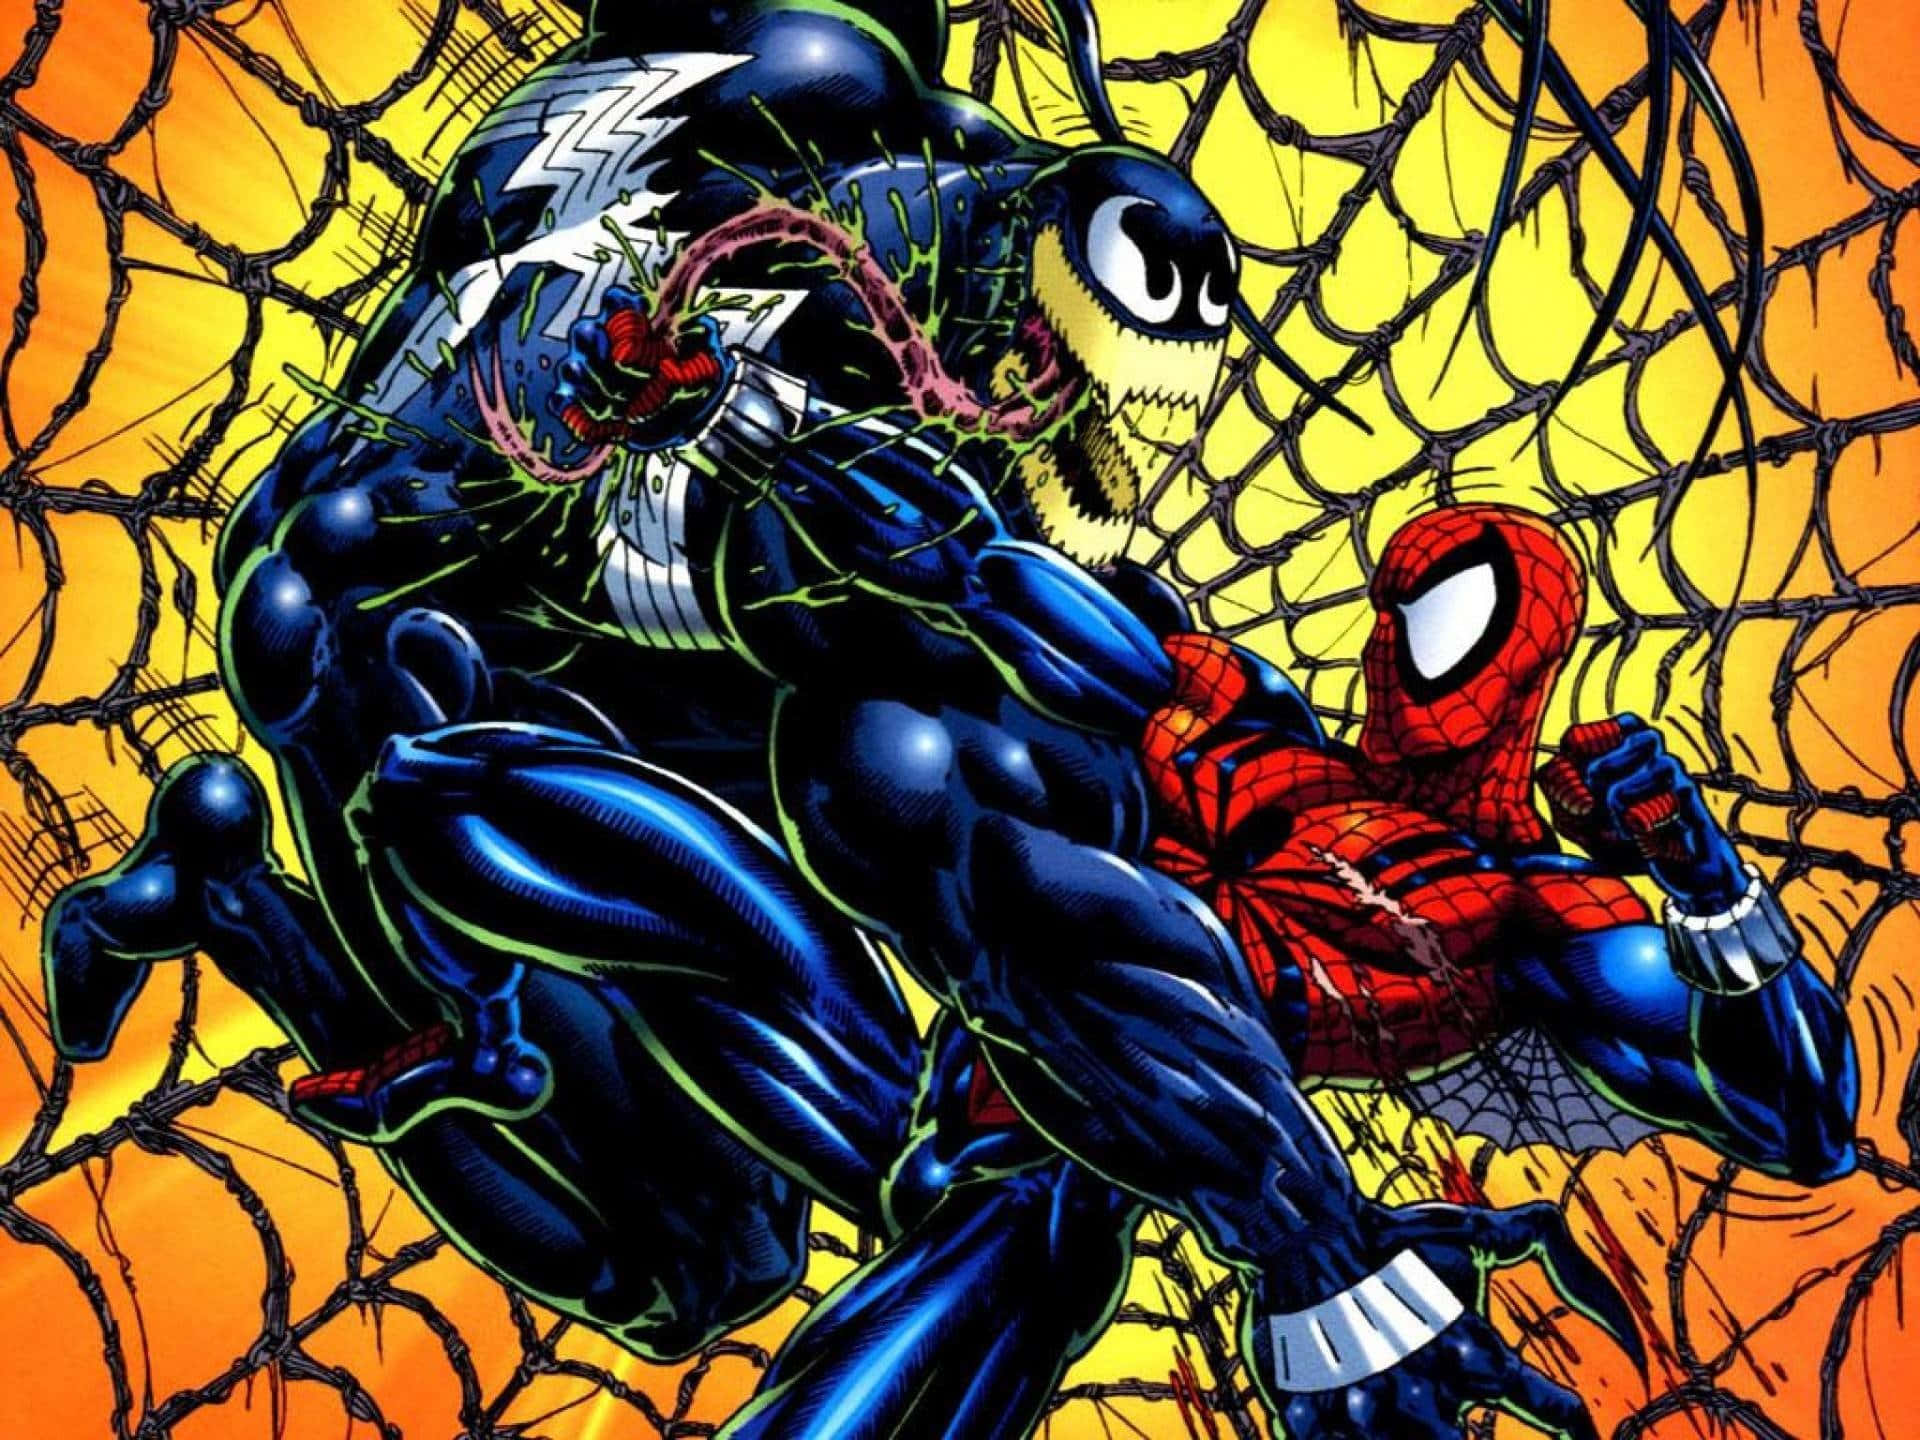 Venom unleashes his fury in a stunning comic book illustration Wallpaper